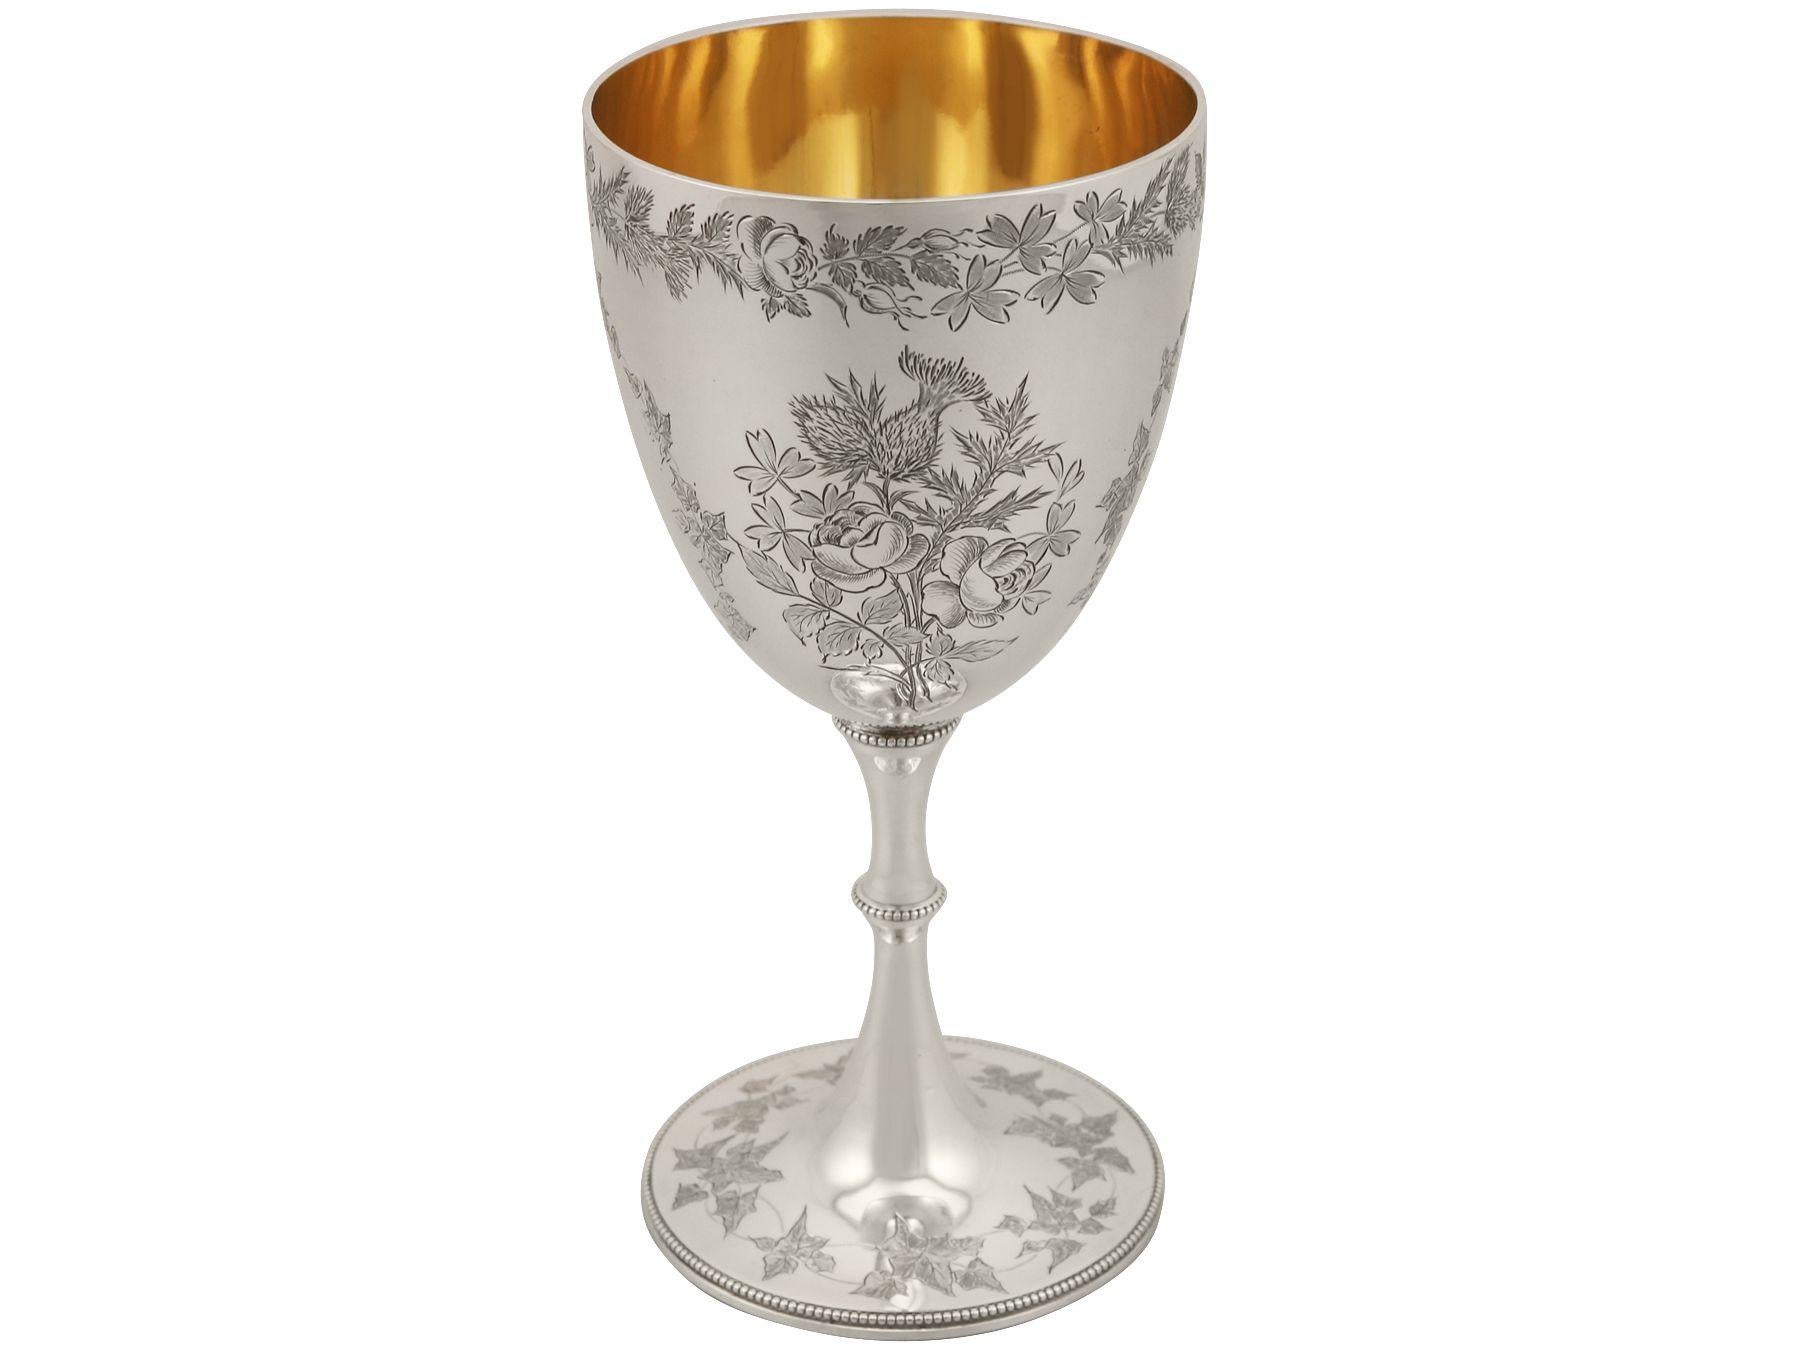 Late 19th Century 19th Century Antique Victorian Sterling Silver Goblet by George Adams 1870